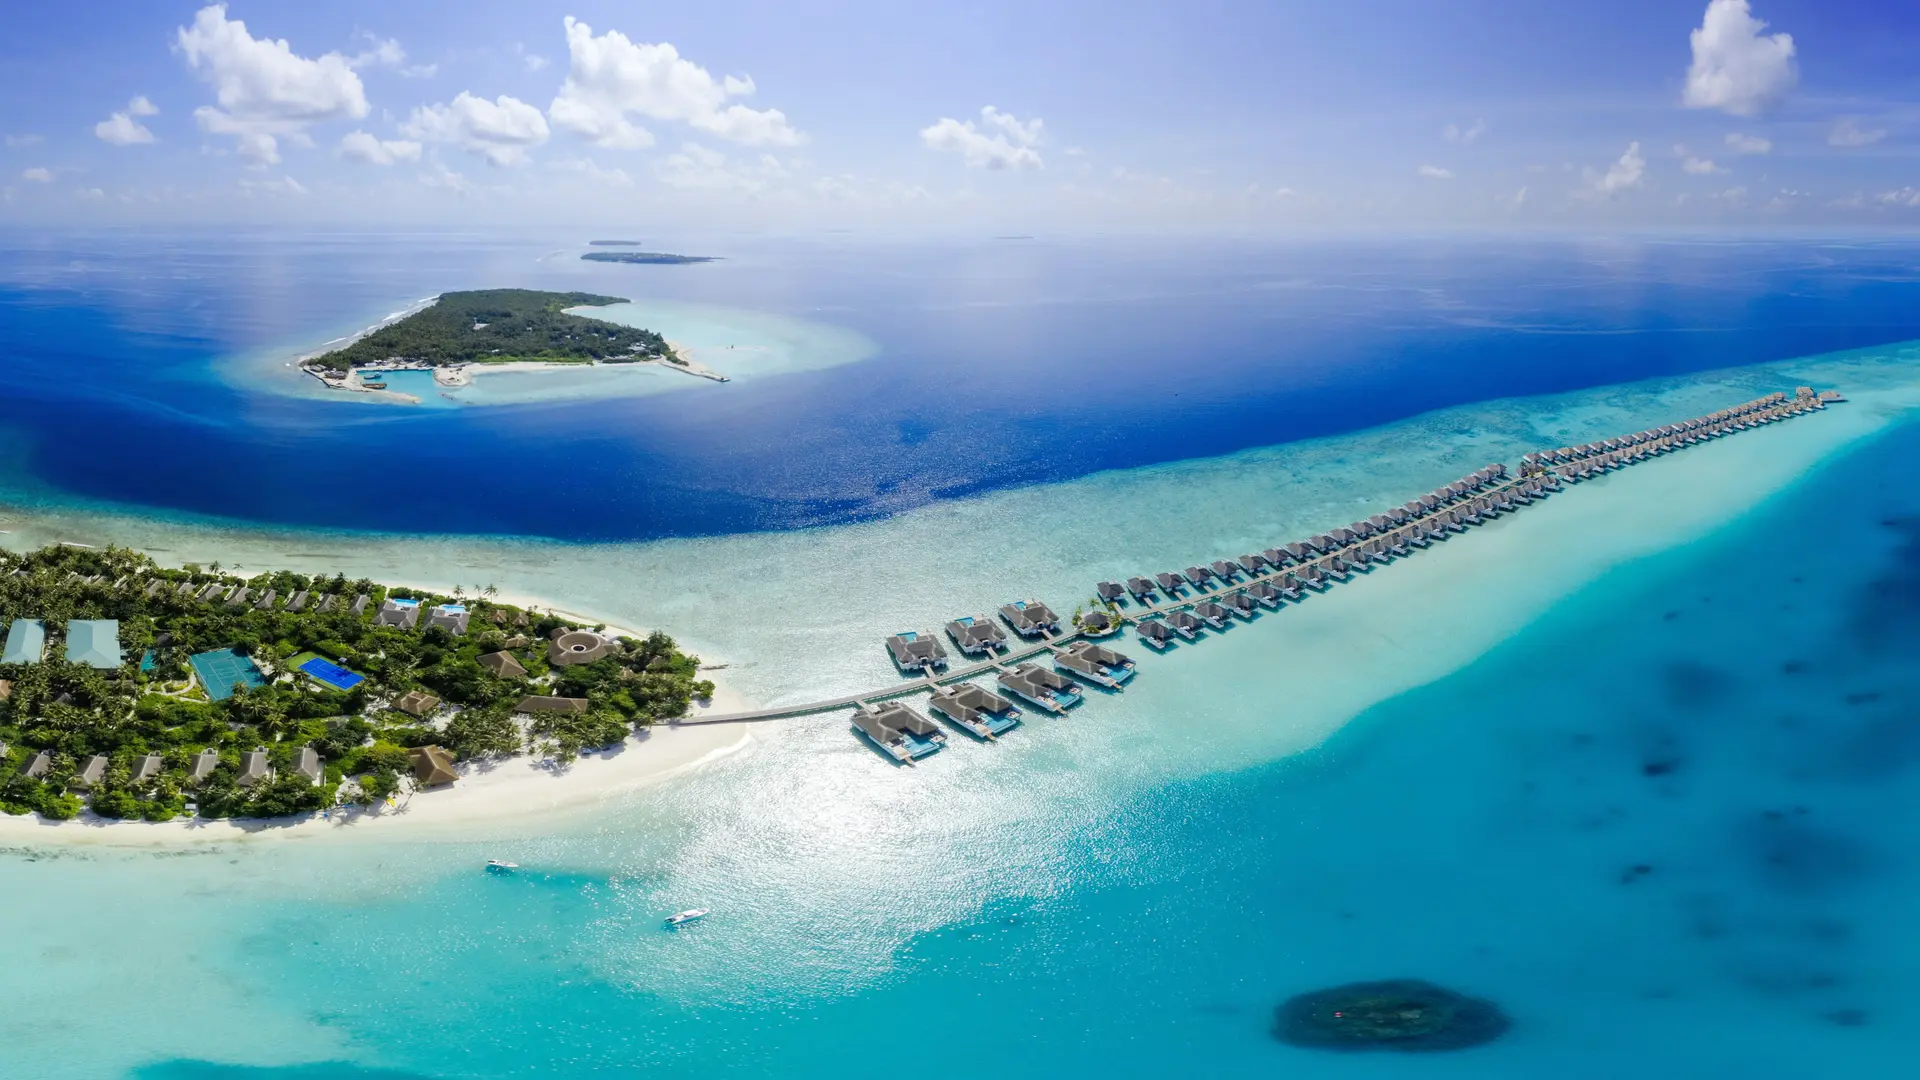 an overview of the overwater bungalows in the maldives